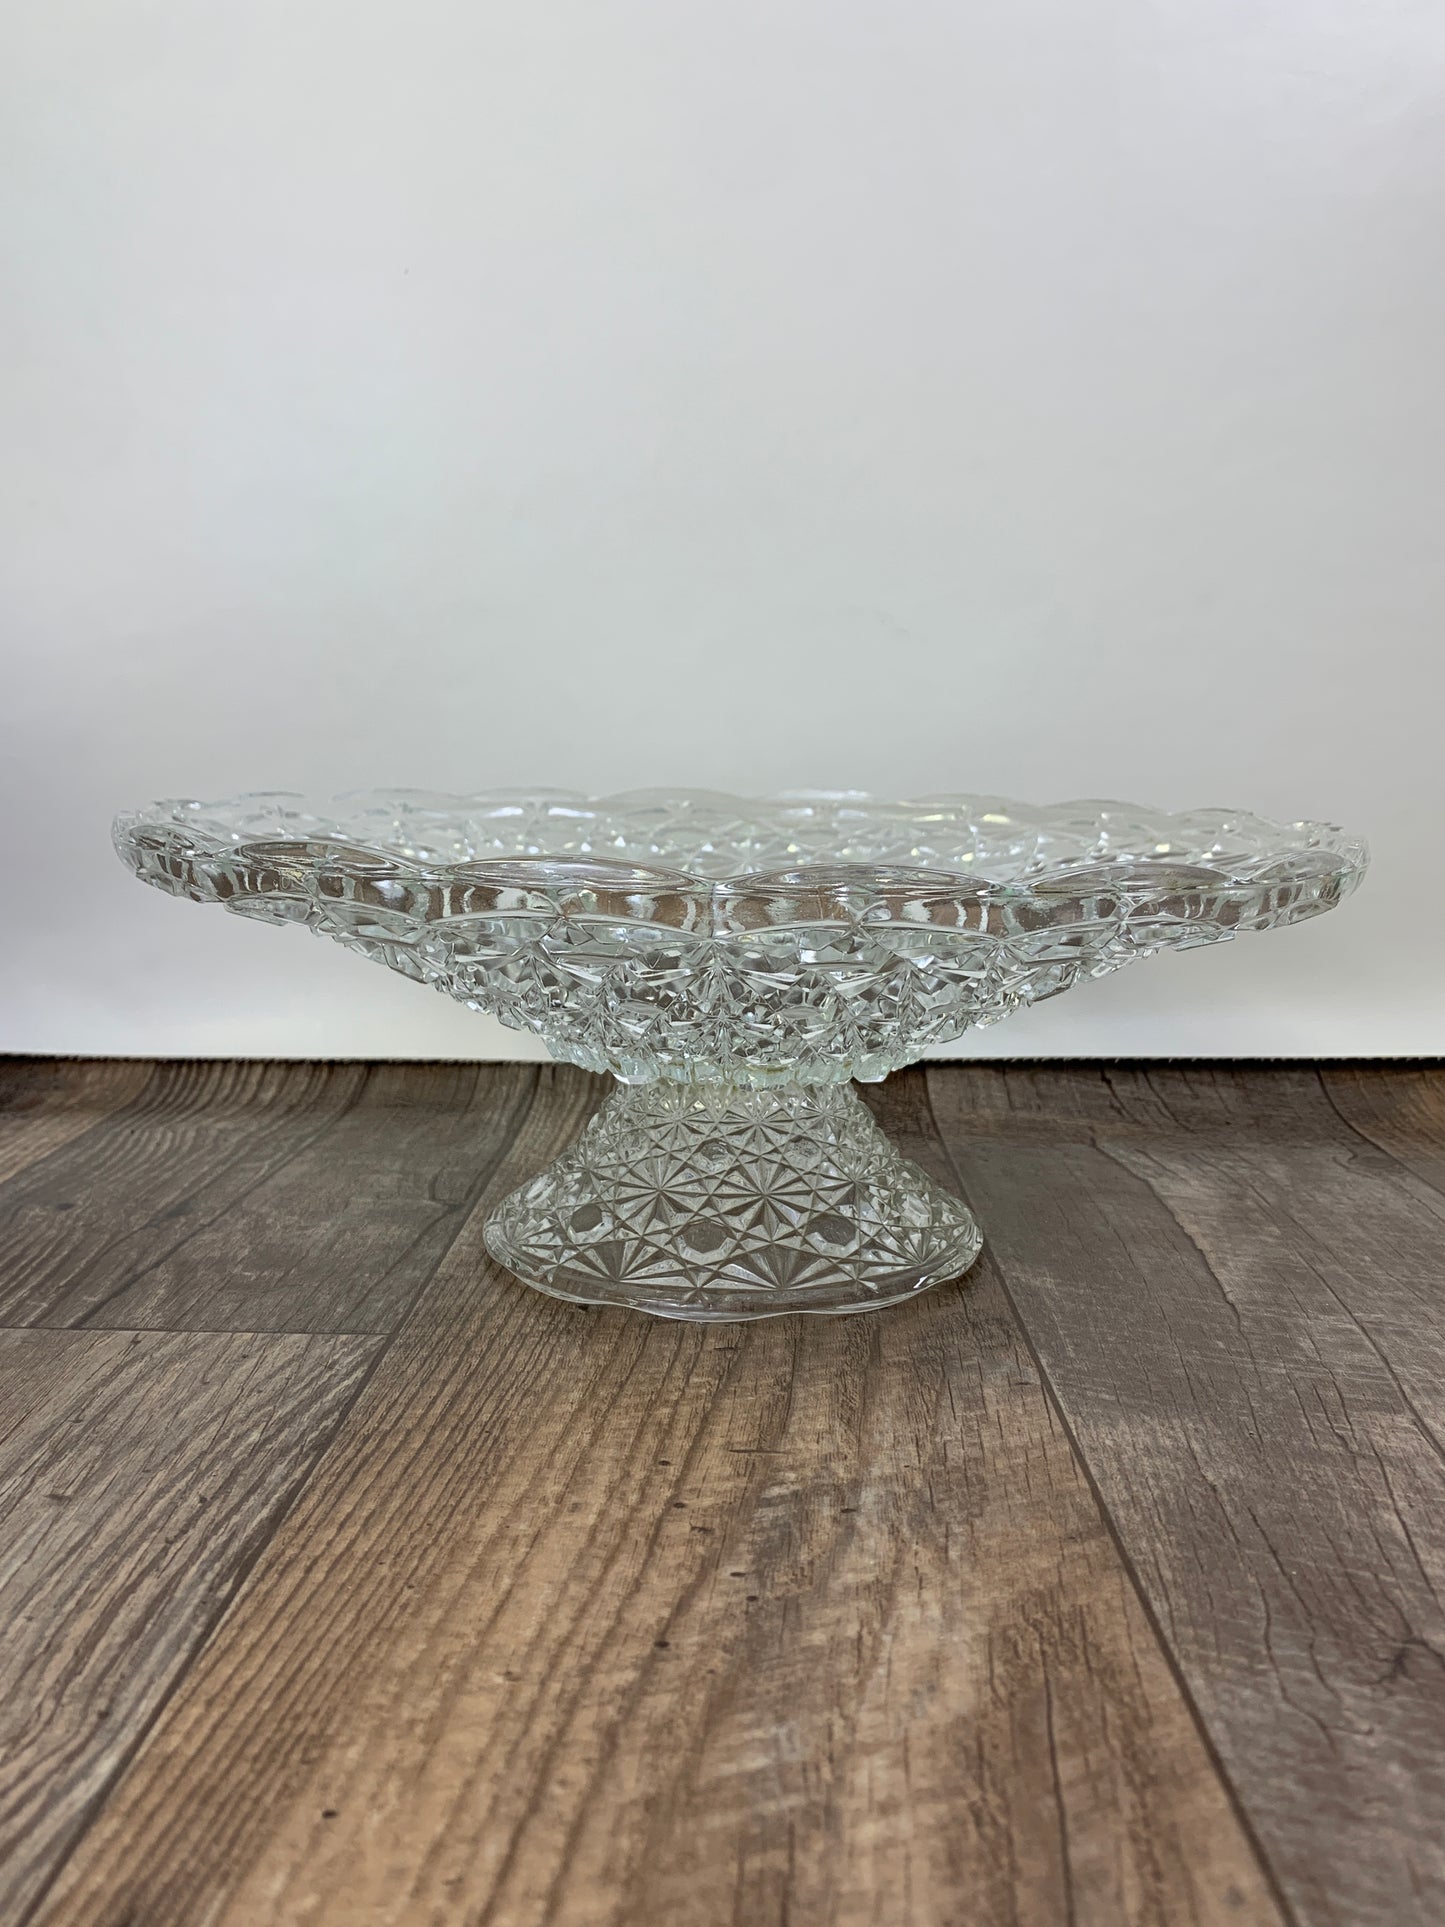 Large Fruit Bowl Vintage Low Bowl Daisy and Button Pressed Glass Footed Tray Large Pedestal Dish